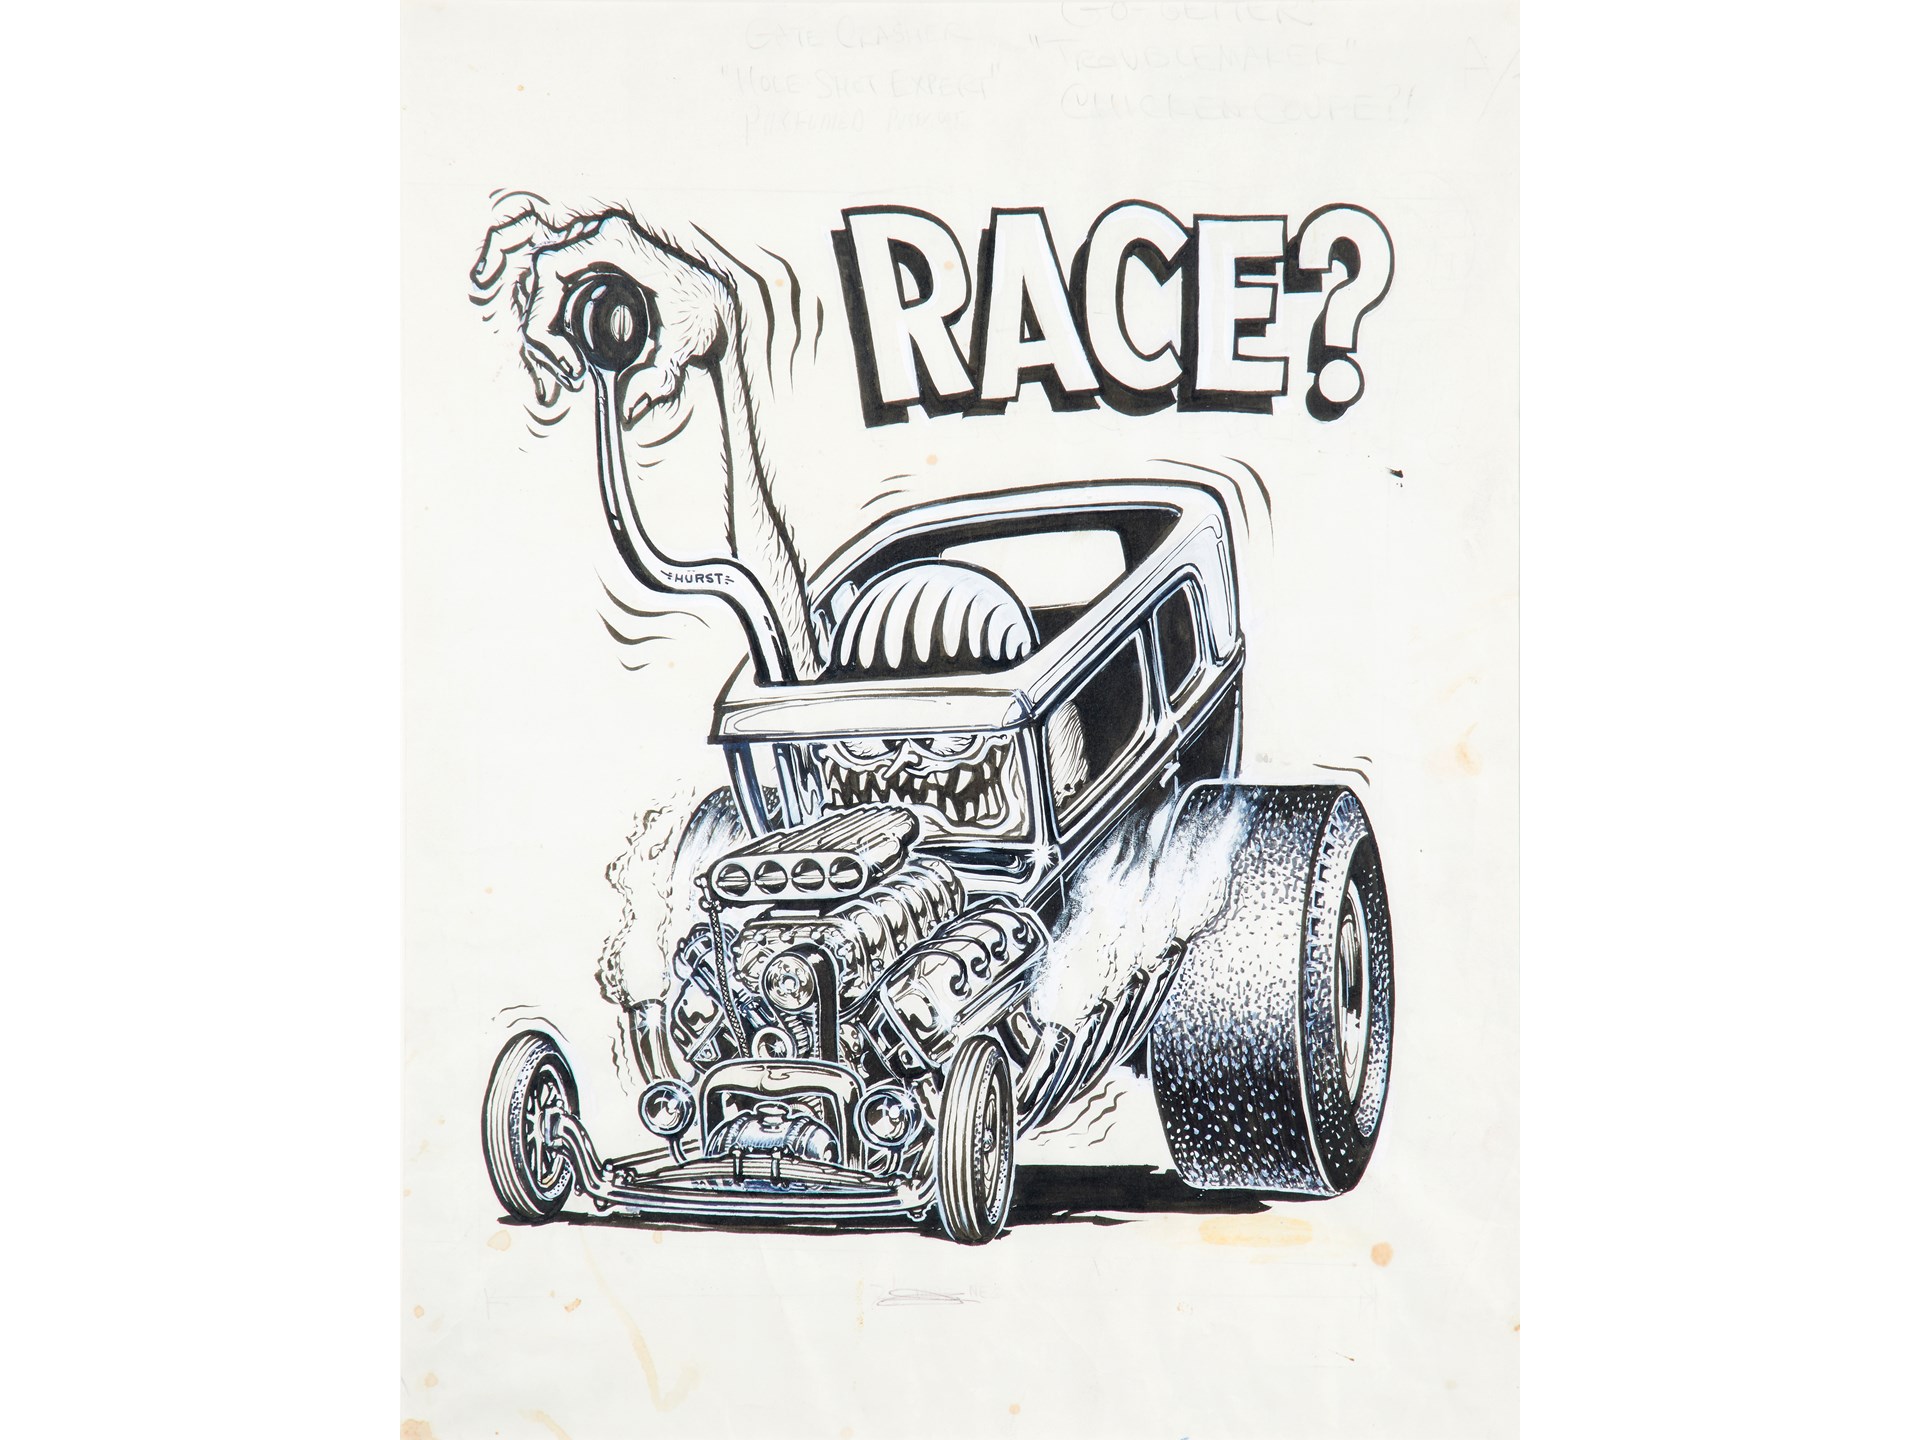 Race? By Roth Studios, CA 1969